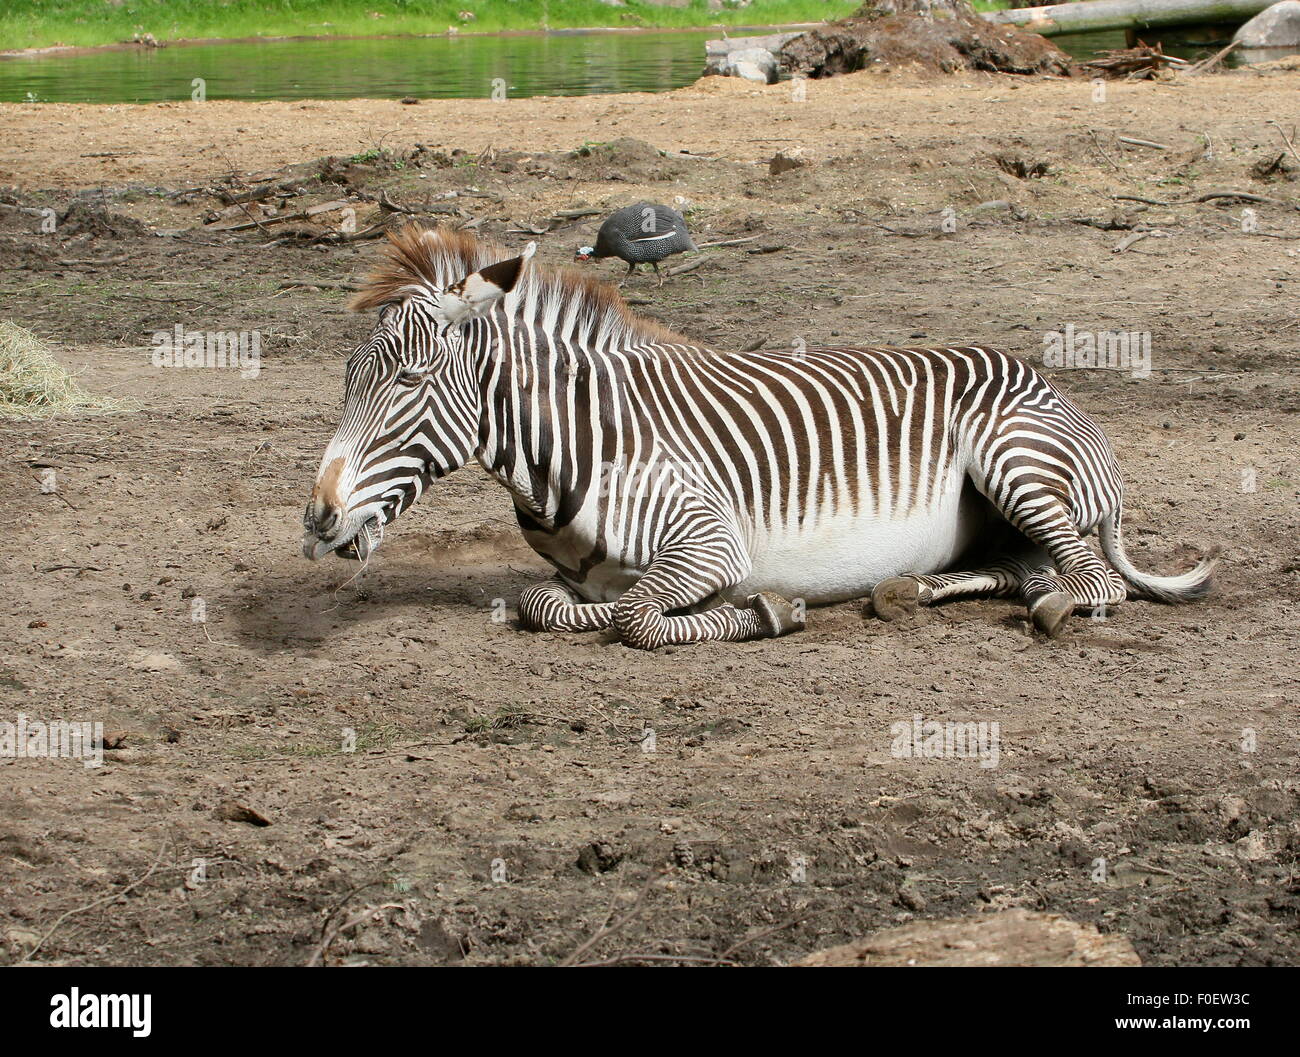 Mature male East African Grévy's zebra or Imperial zebra (Equus grevyi) lying on the ground, resting Stock Photo